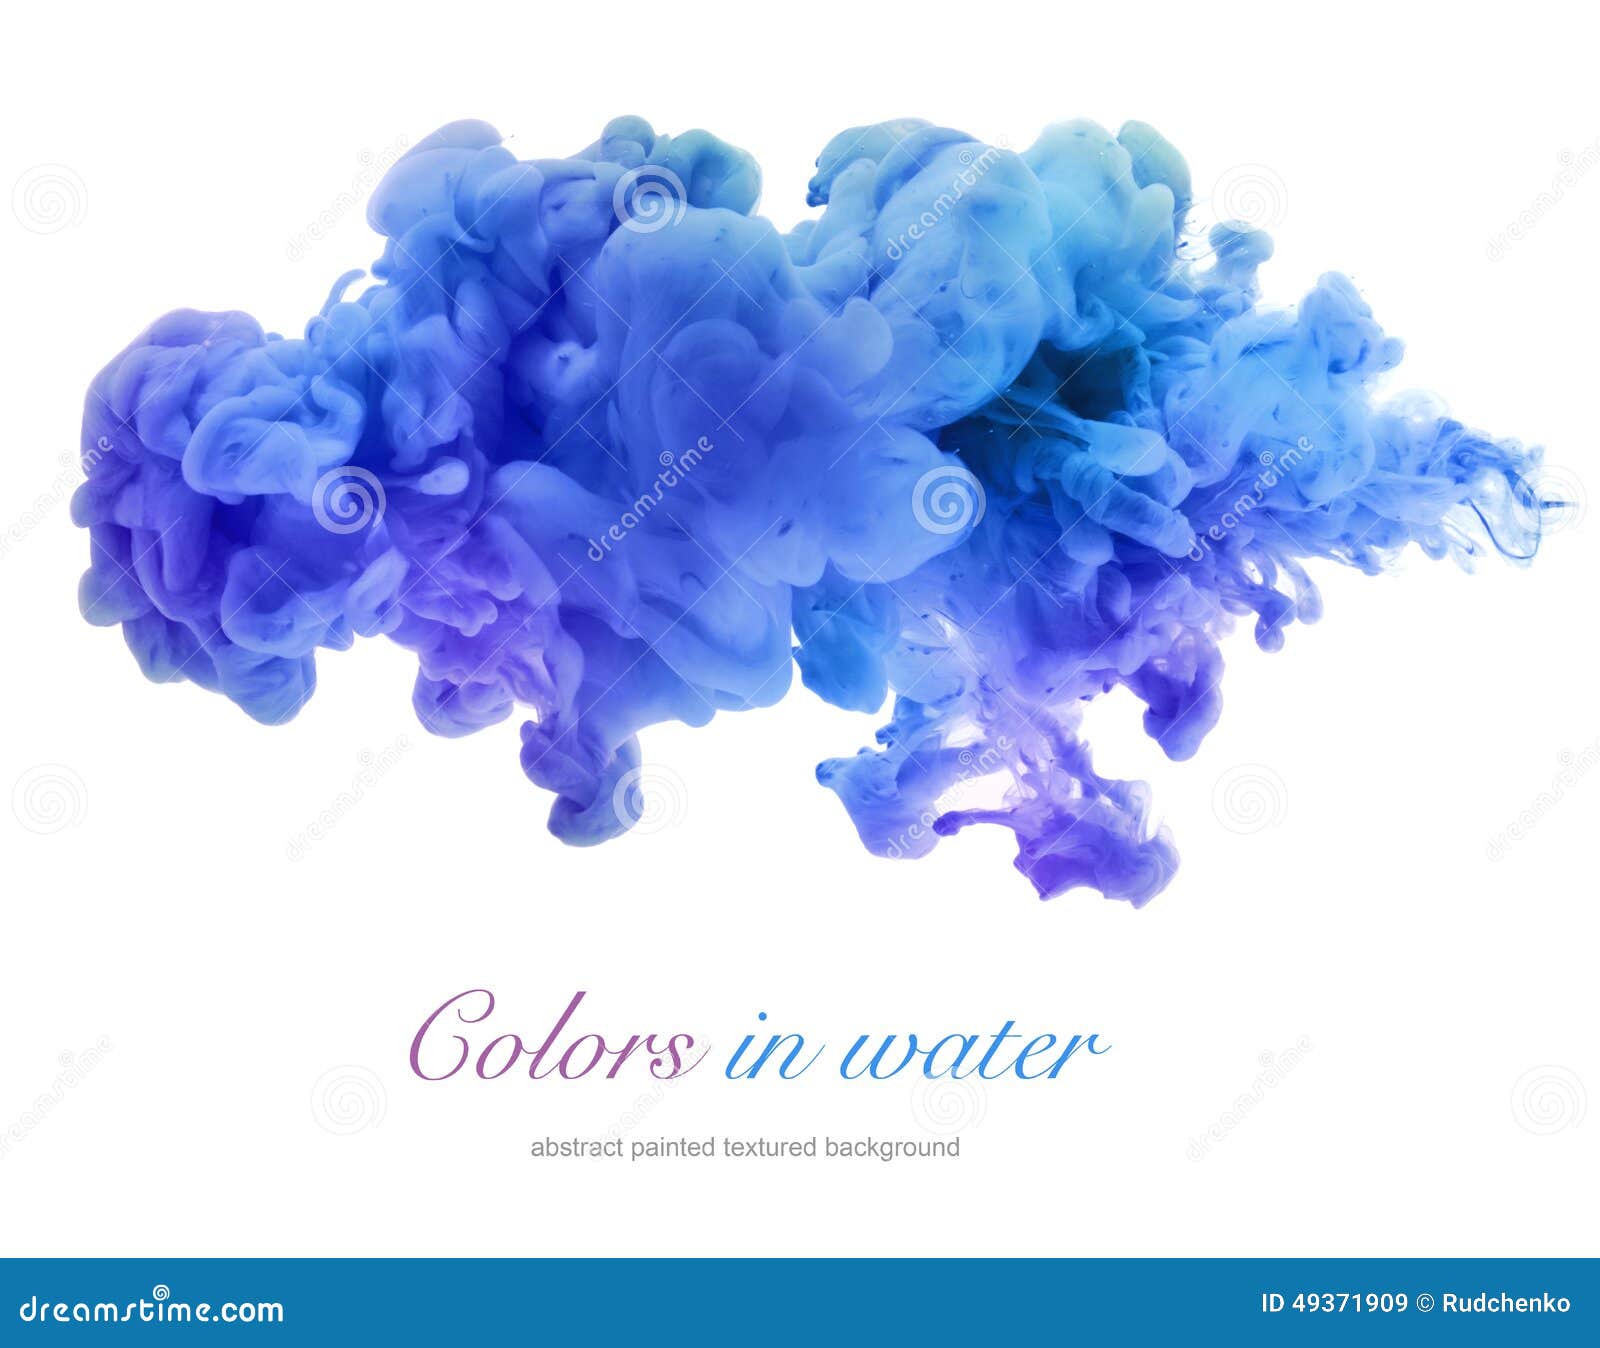 acrylic colors in water. abstract background.